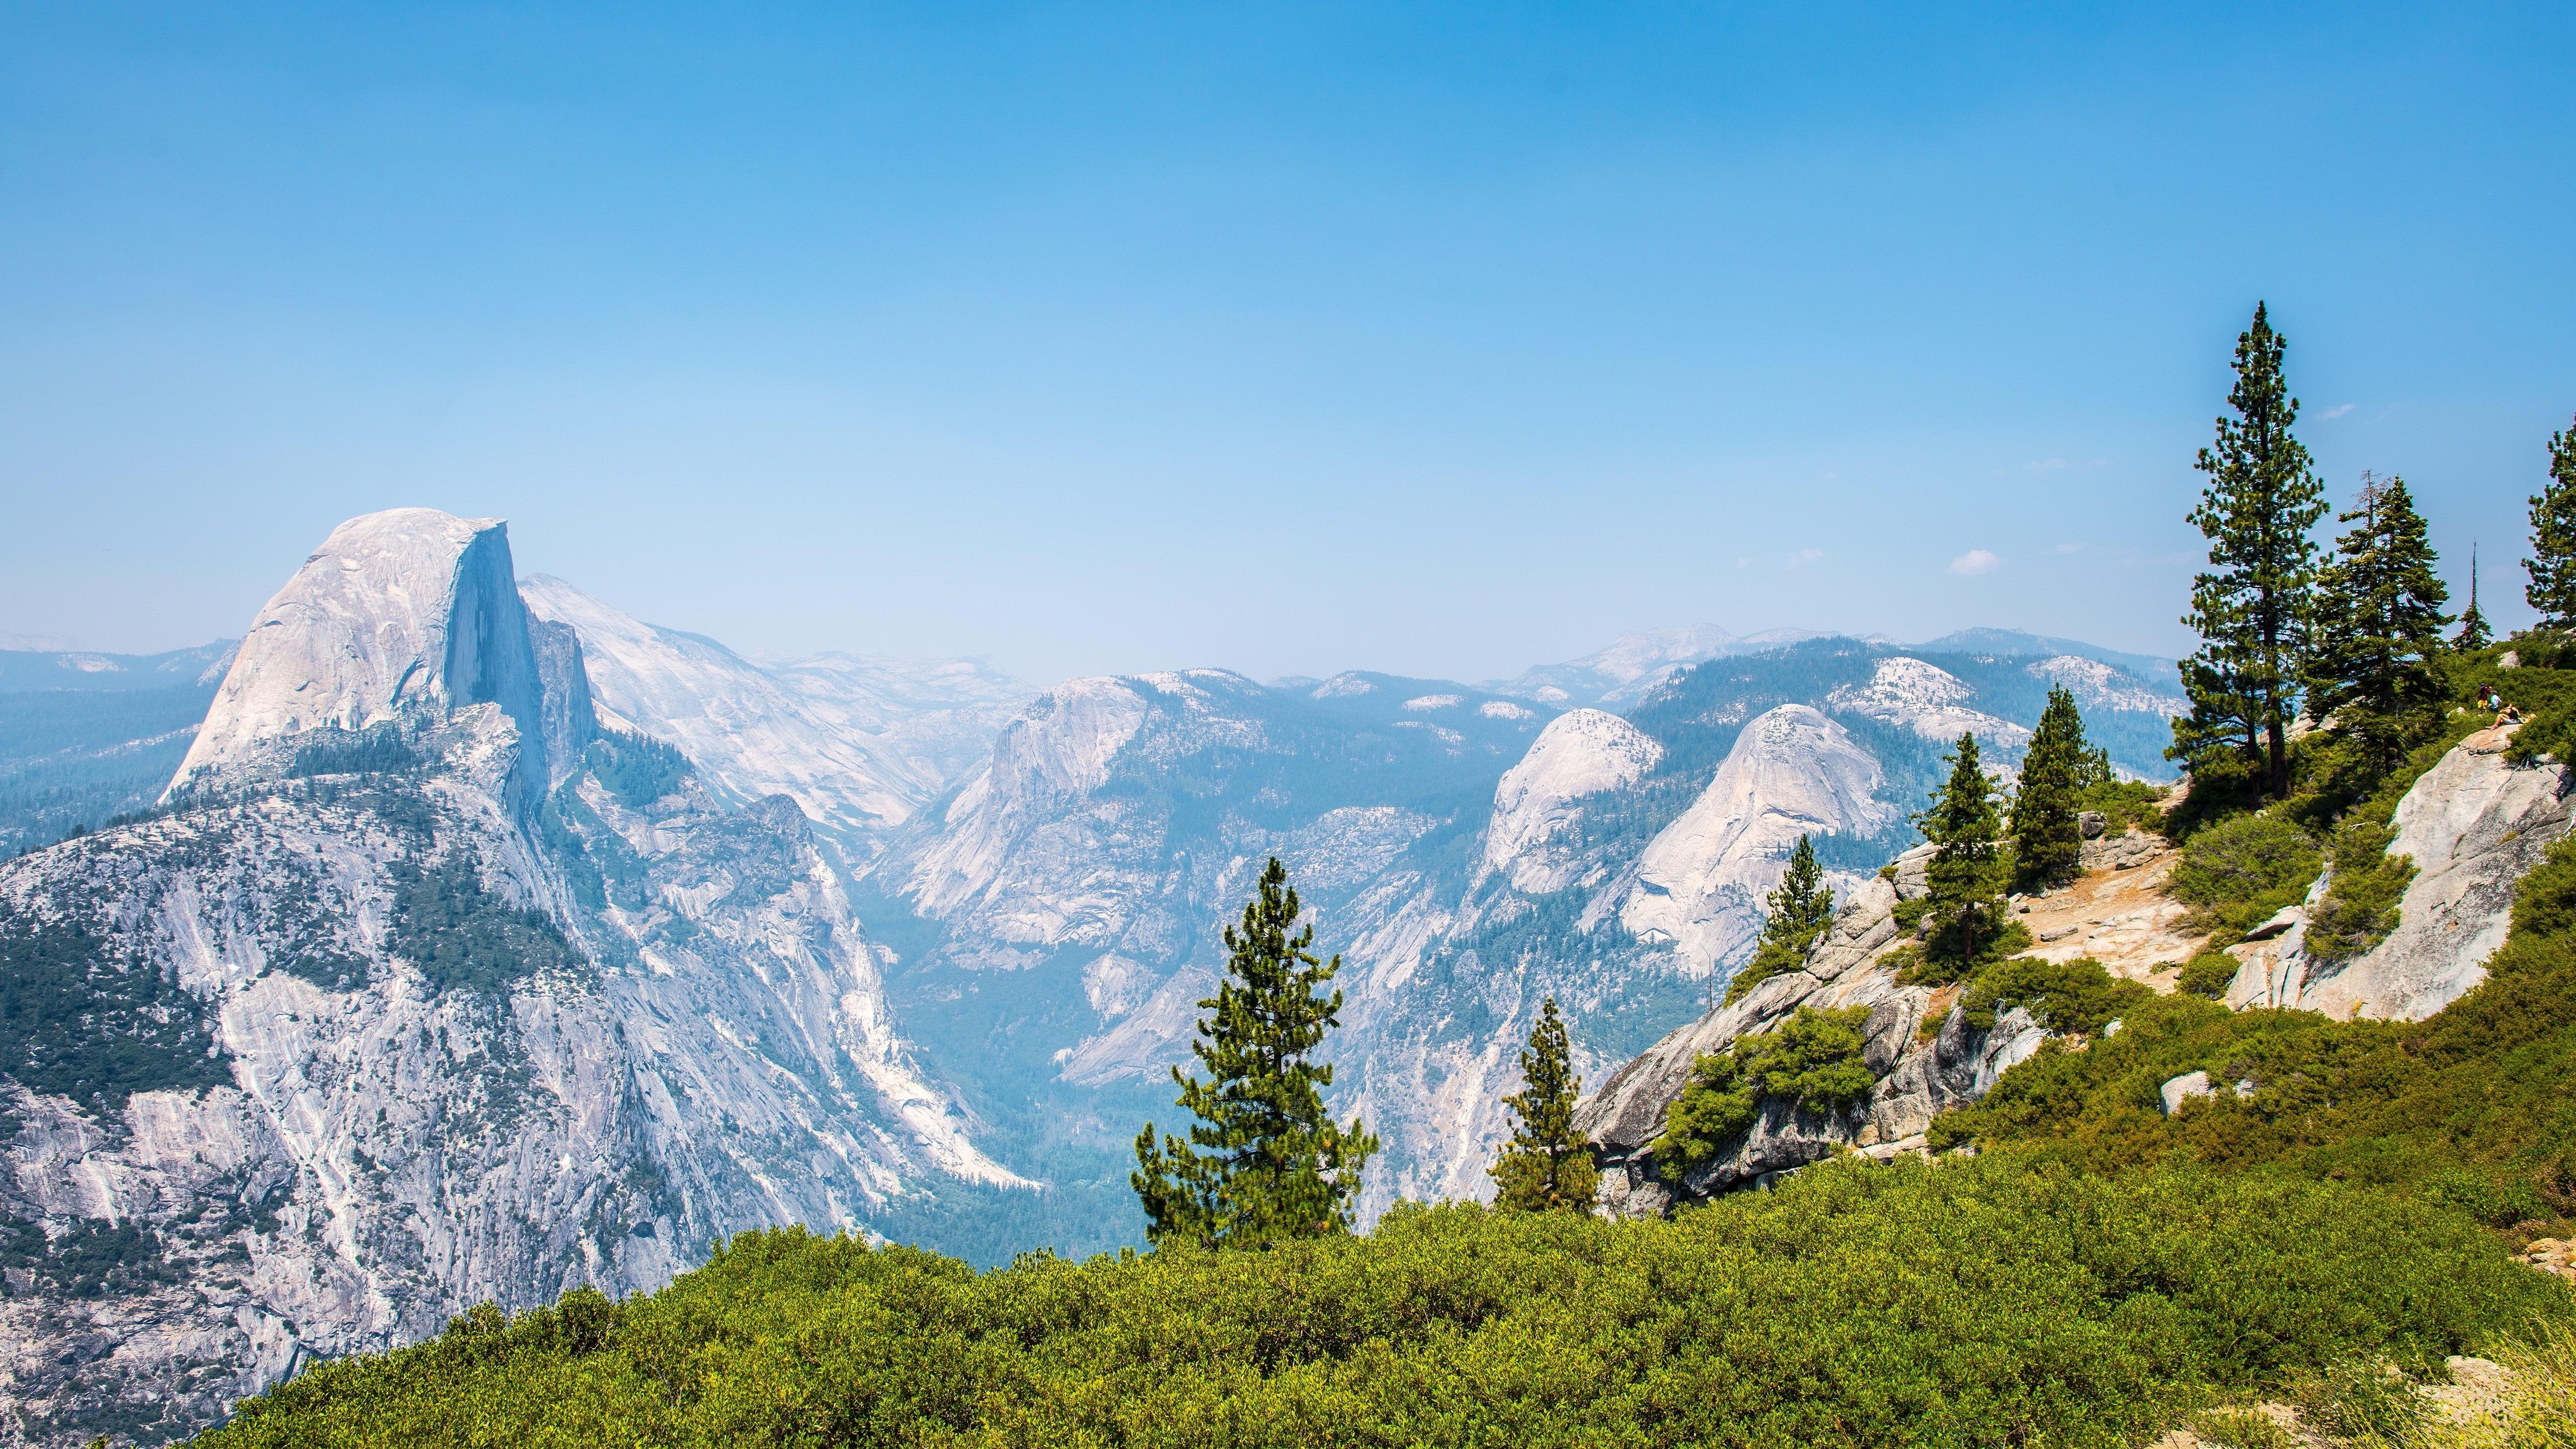 Glacier Point View Of Yosemite Valley And Half Dome Wallpaper Backiee